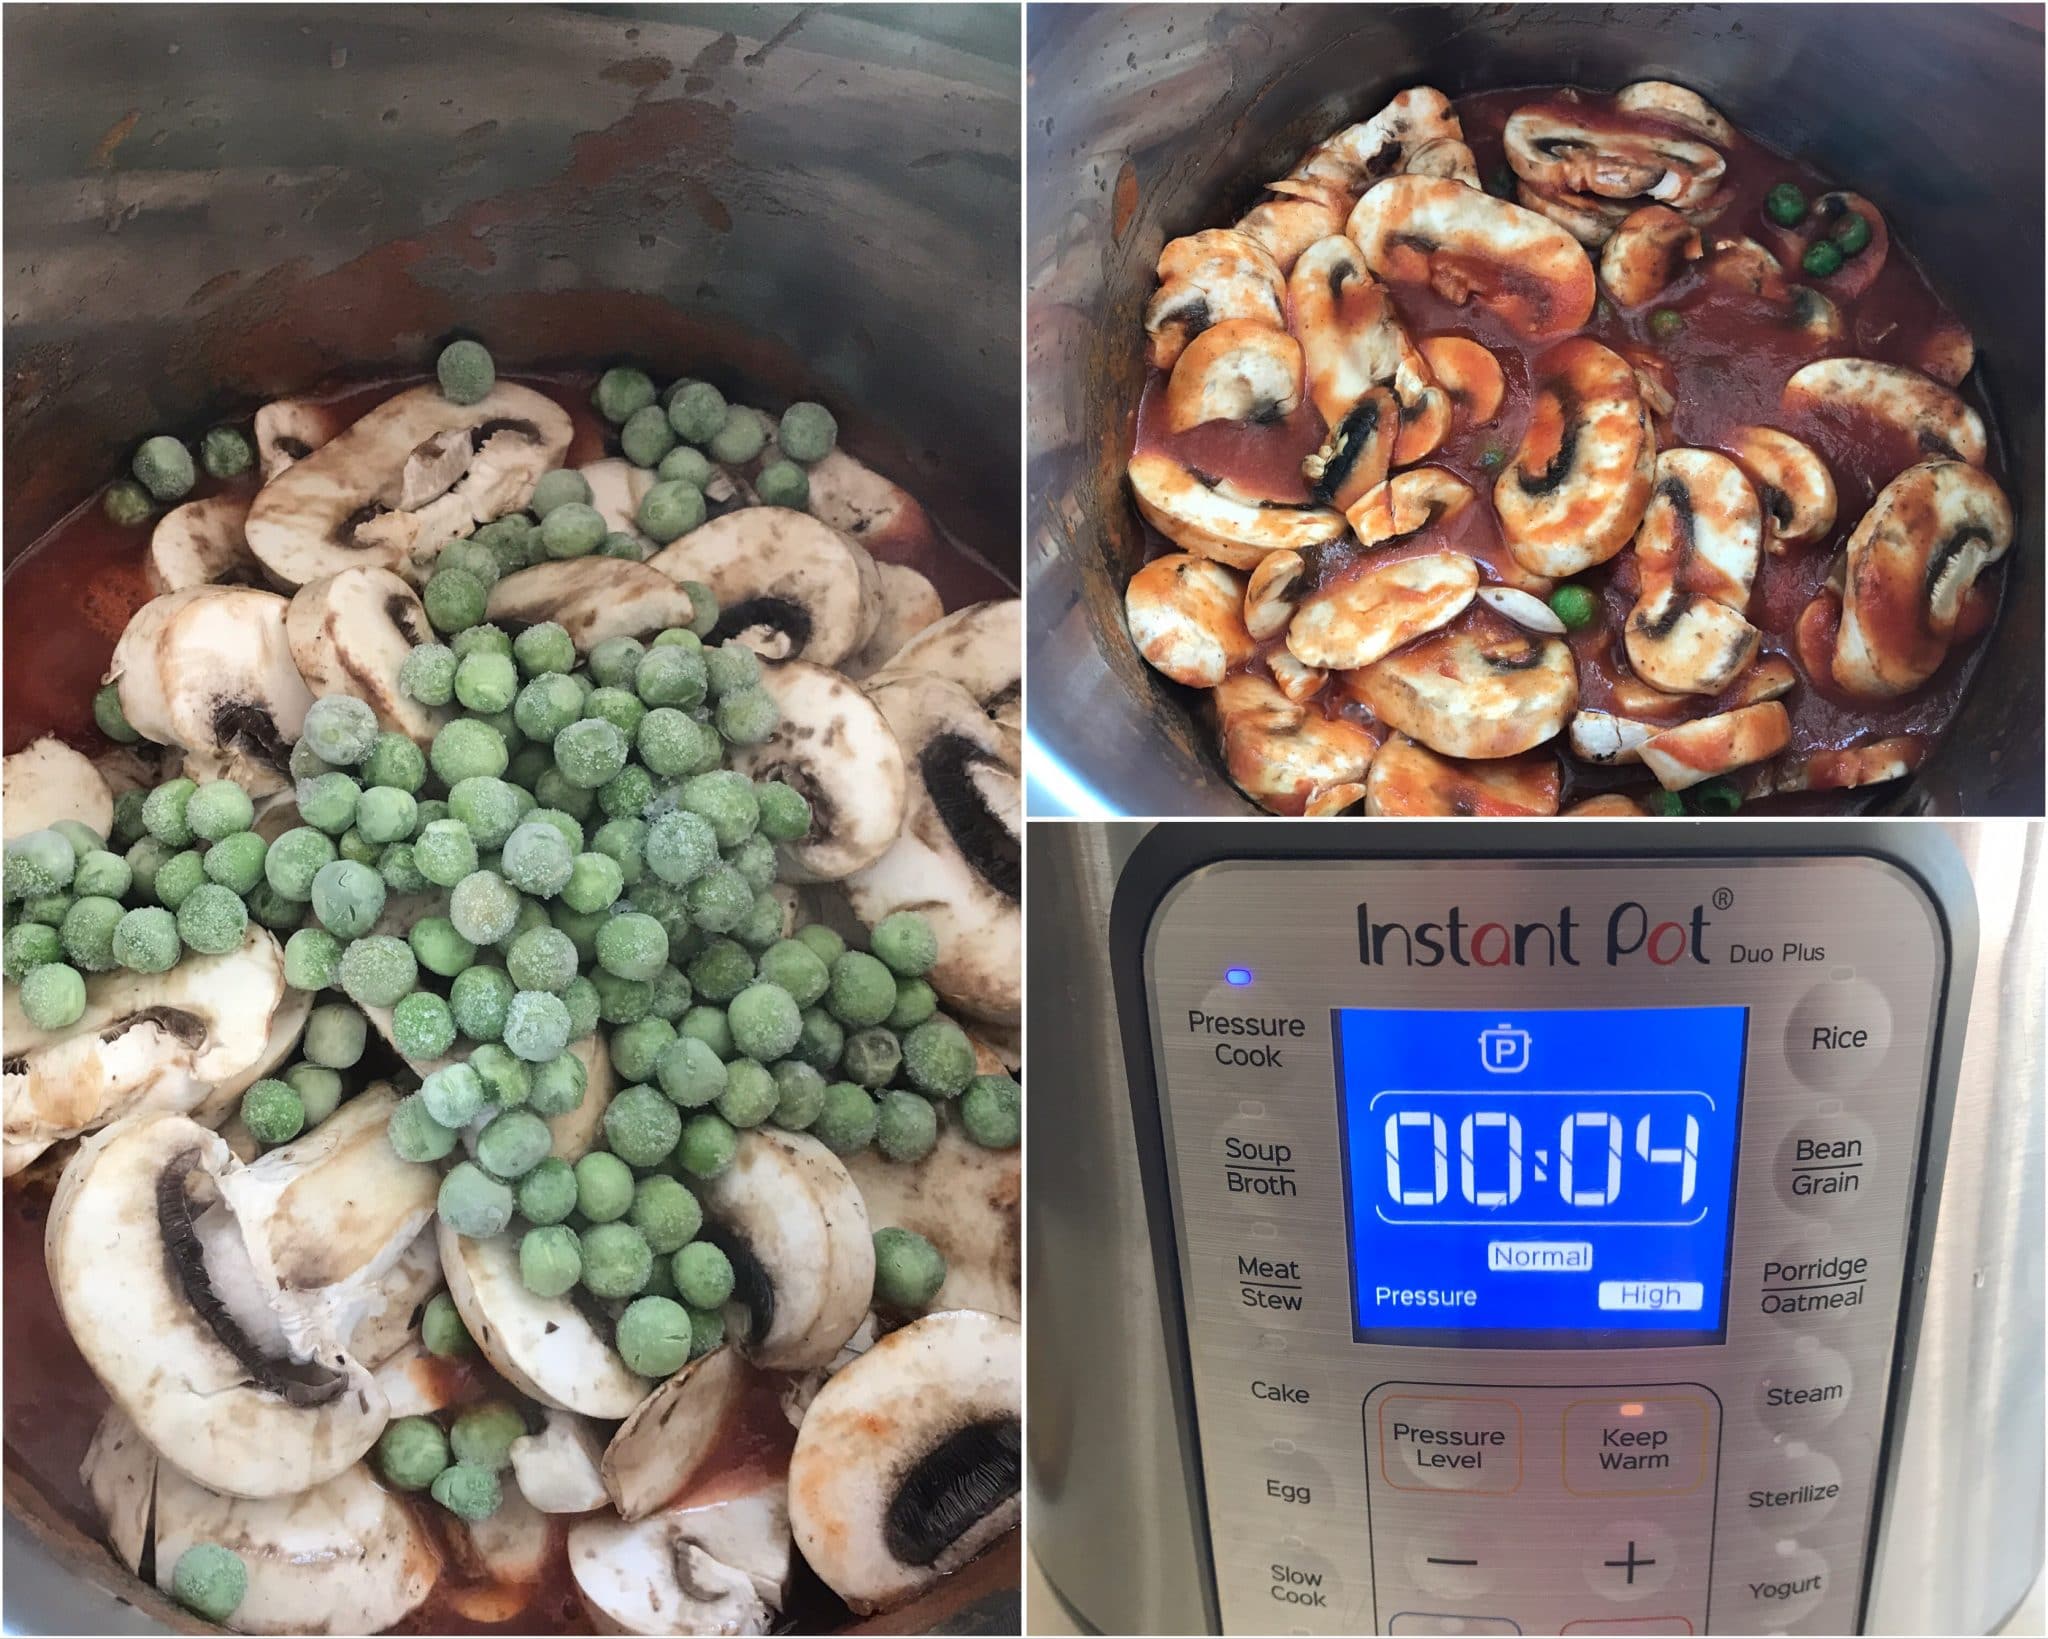 An instant pot filled with mushroom and peas with gravy